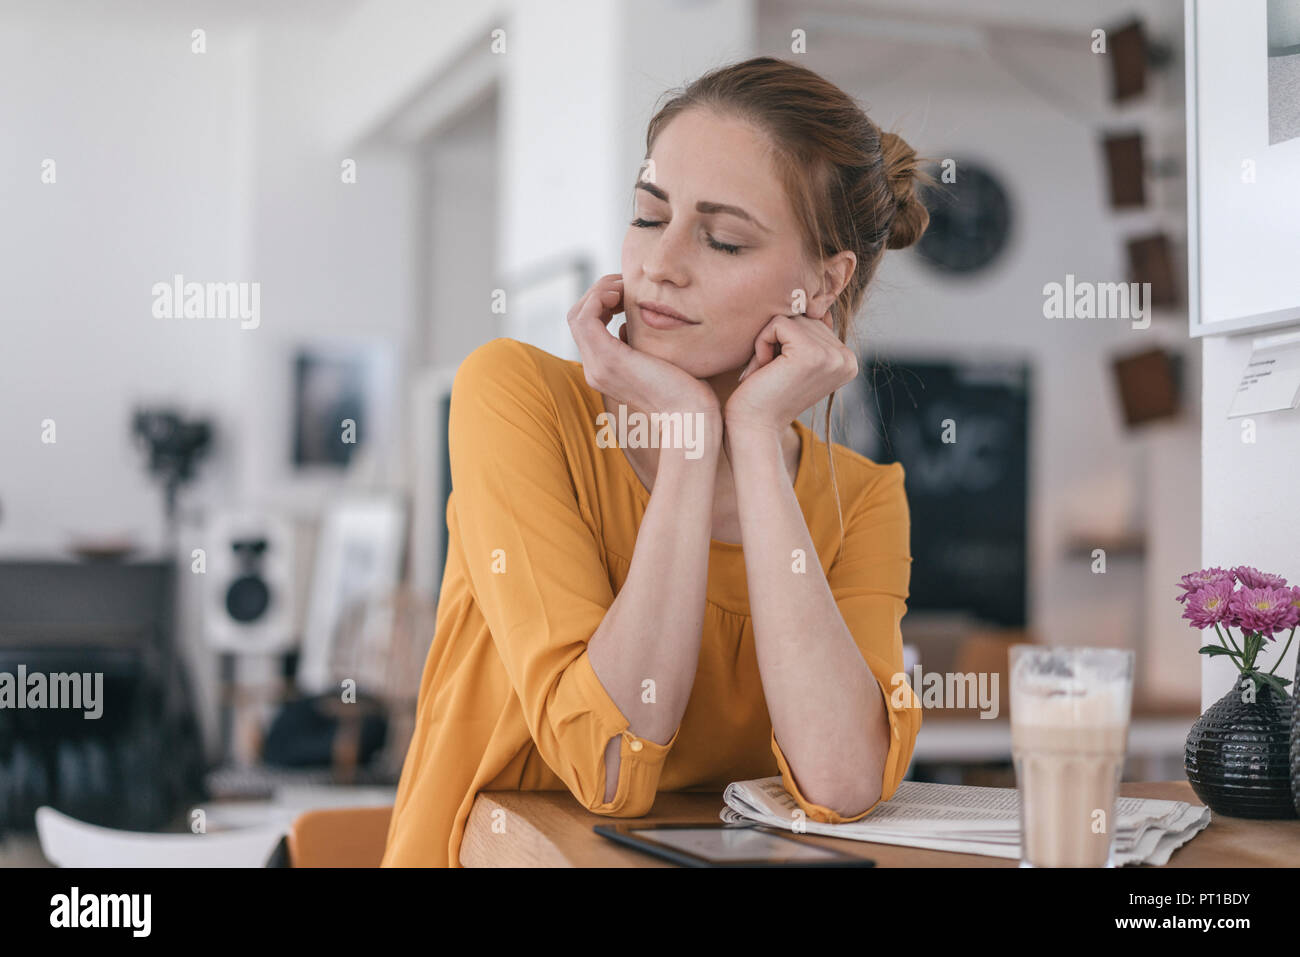 Young woman working in coworking space, closing eyes Stock Photo